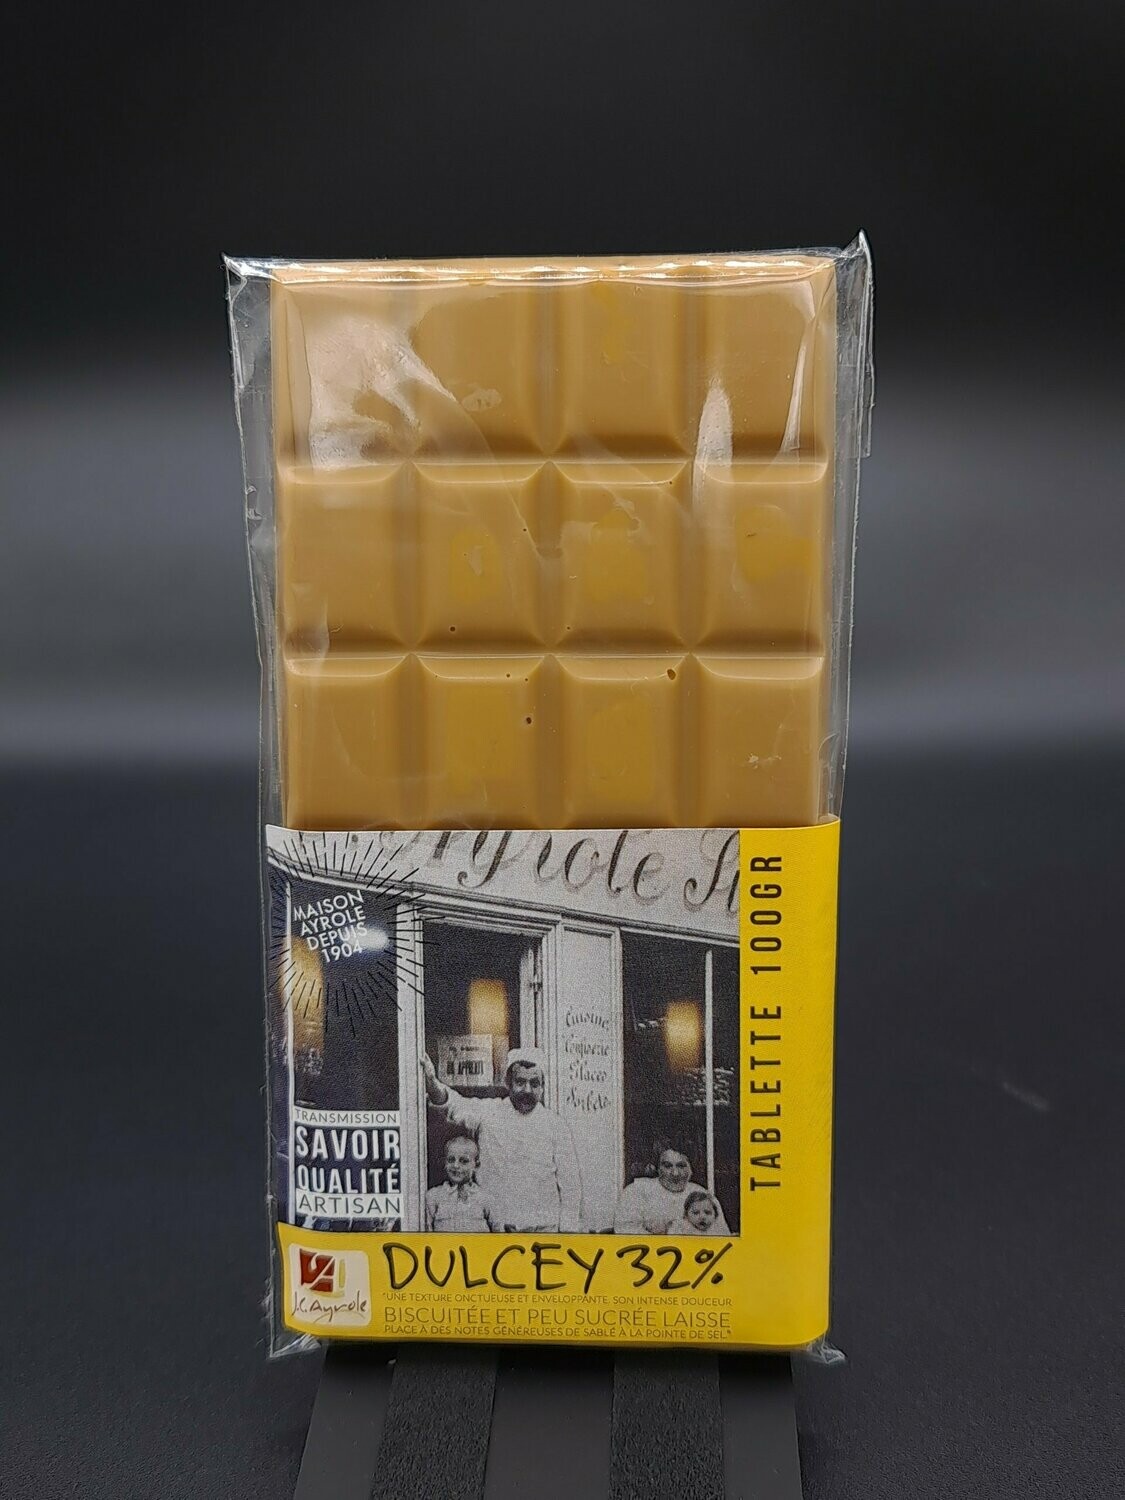 Tablette chocolat dulcey